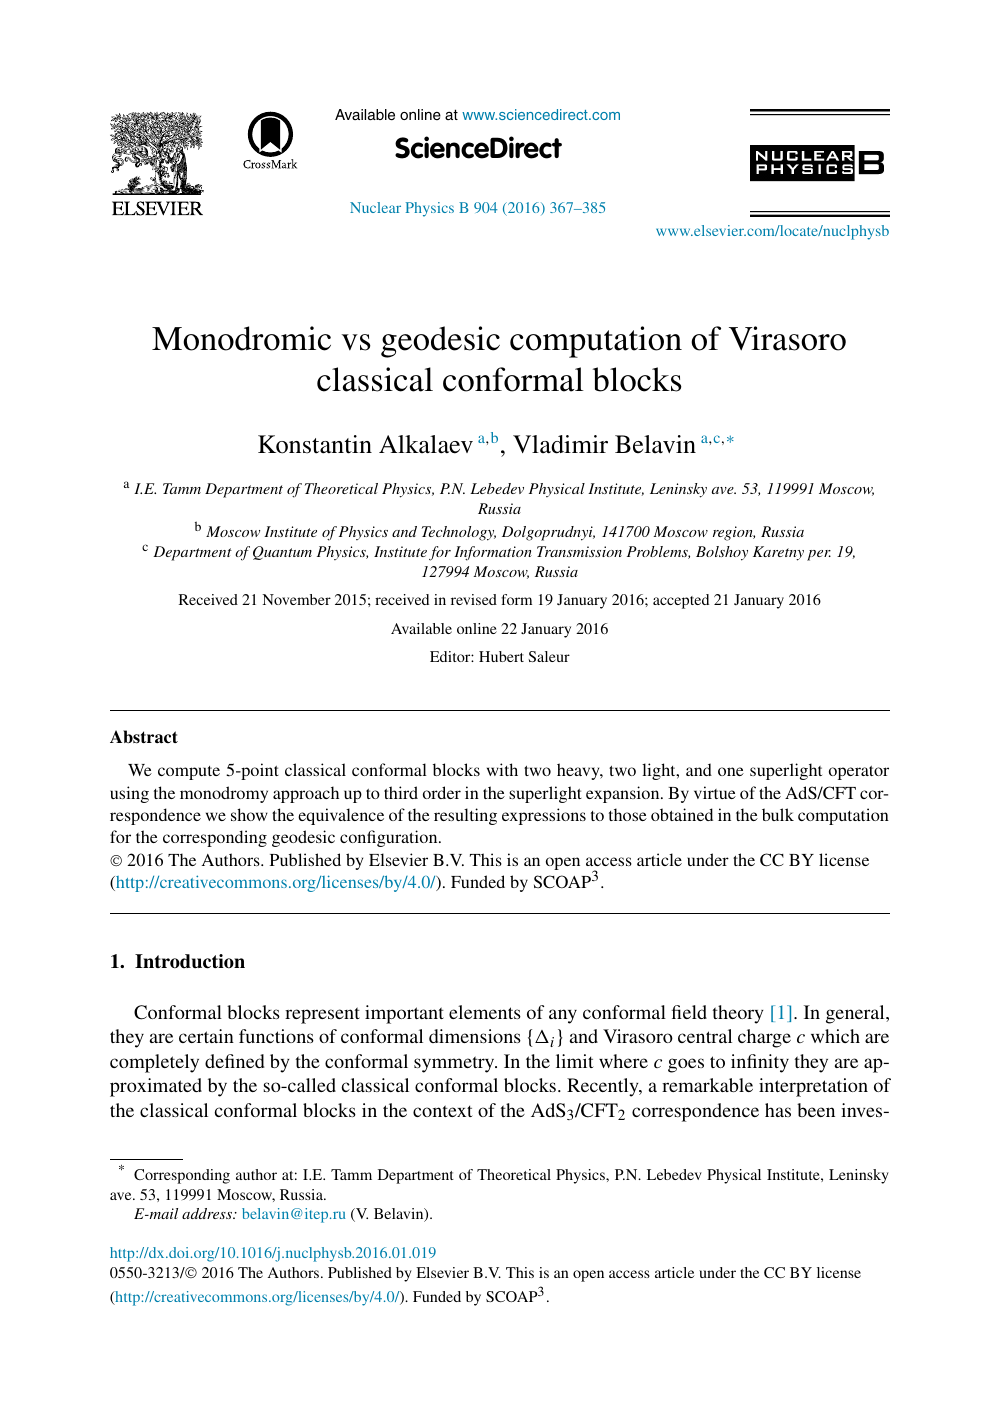 Monodromic Vs Geodesic Computation Of Virasoro Classical Conformal Blocks Topic Of Research Paper In Physical Sciences Download Scholarly Article Pdf And Read For Free On Cyberleninka Open Science Hub